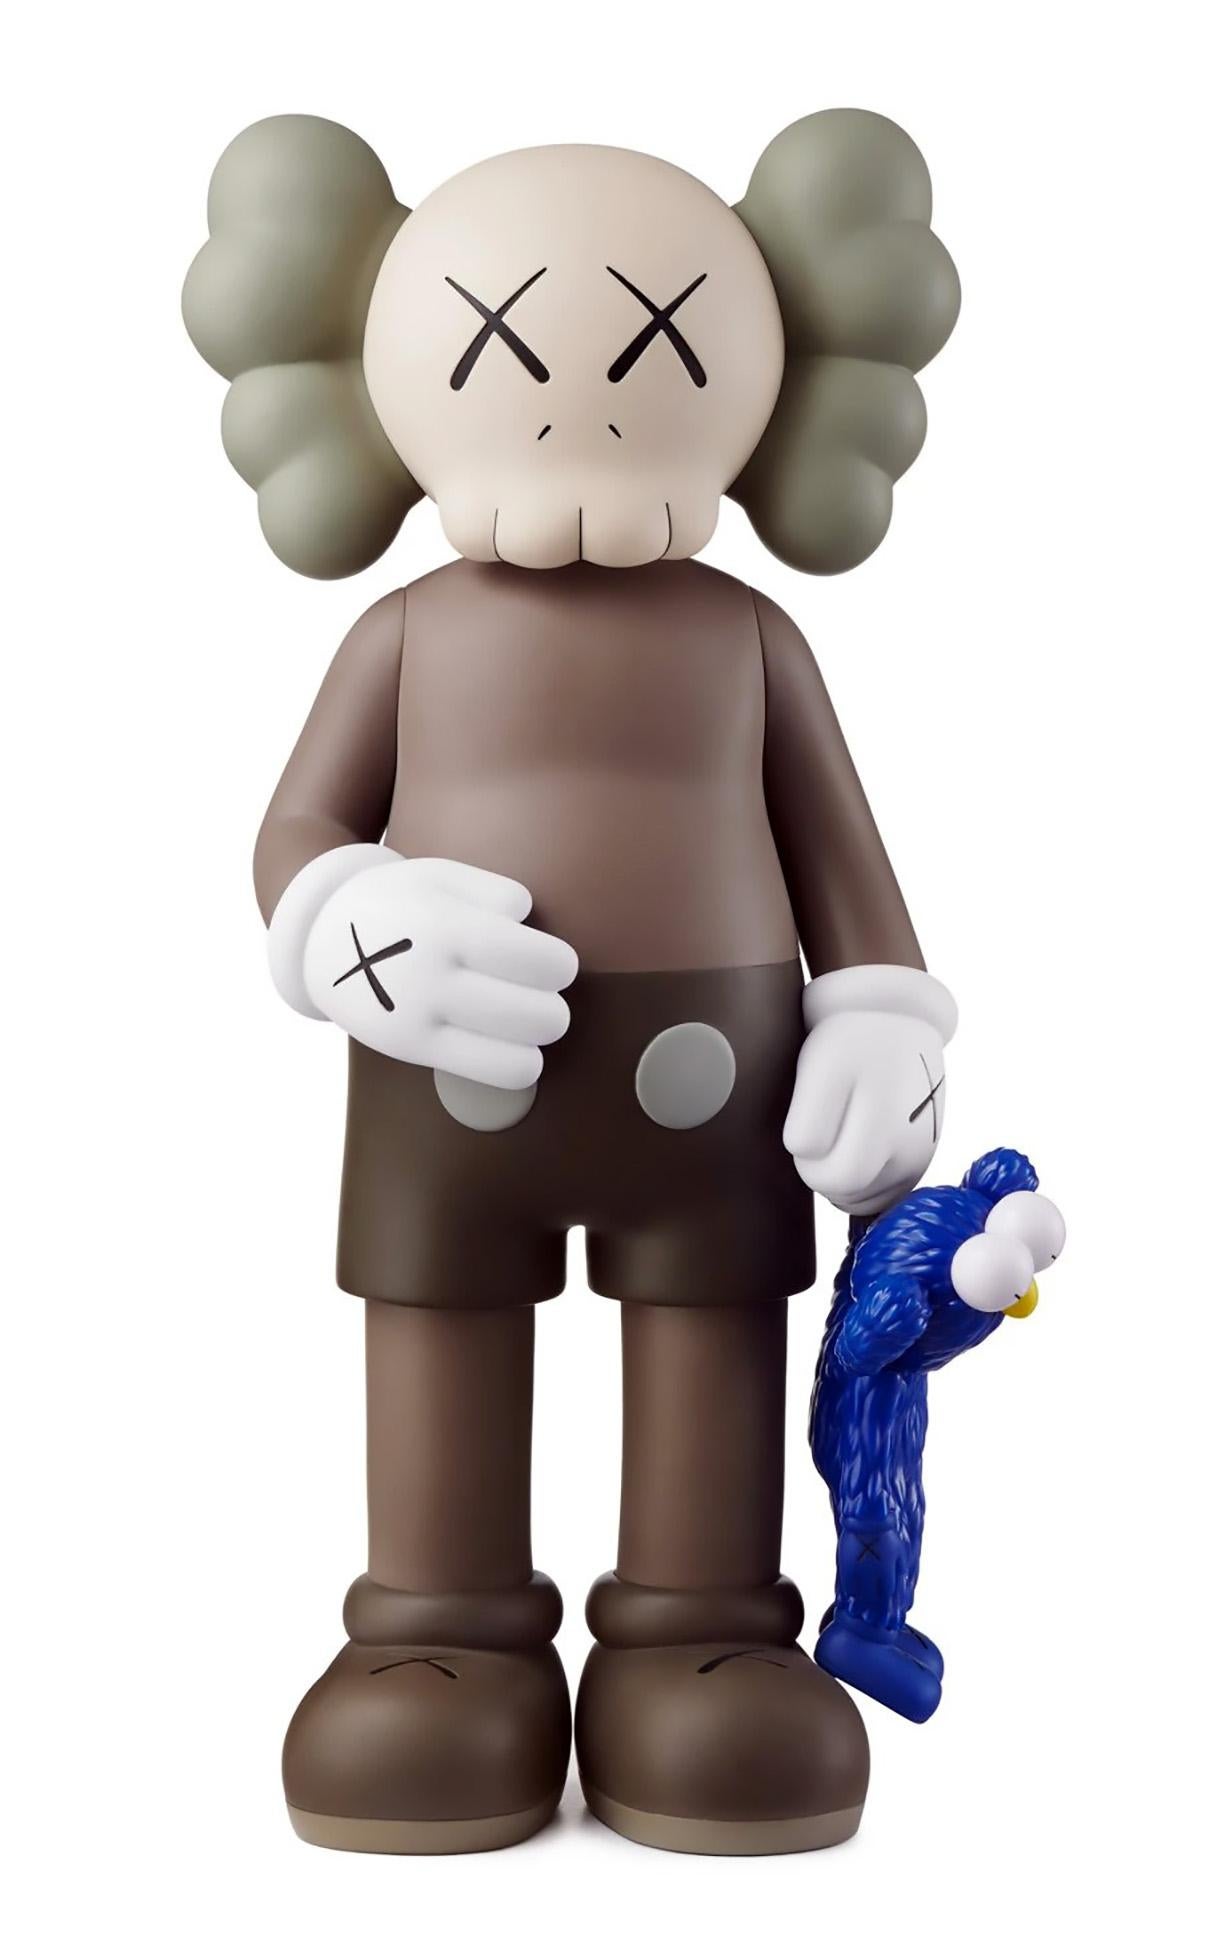 KAWS Companion 2016-2021:
A sharply curated set of 10 distinguished individual Brown KAWS Companions new & unopened in original packaging. Dimensions as follows:

KAWS Clean Slate, 2018: 14.25 x 8 x 8 inches. 
KAWS Brown Companion 2016: 11 x 5